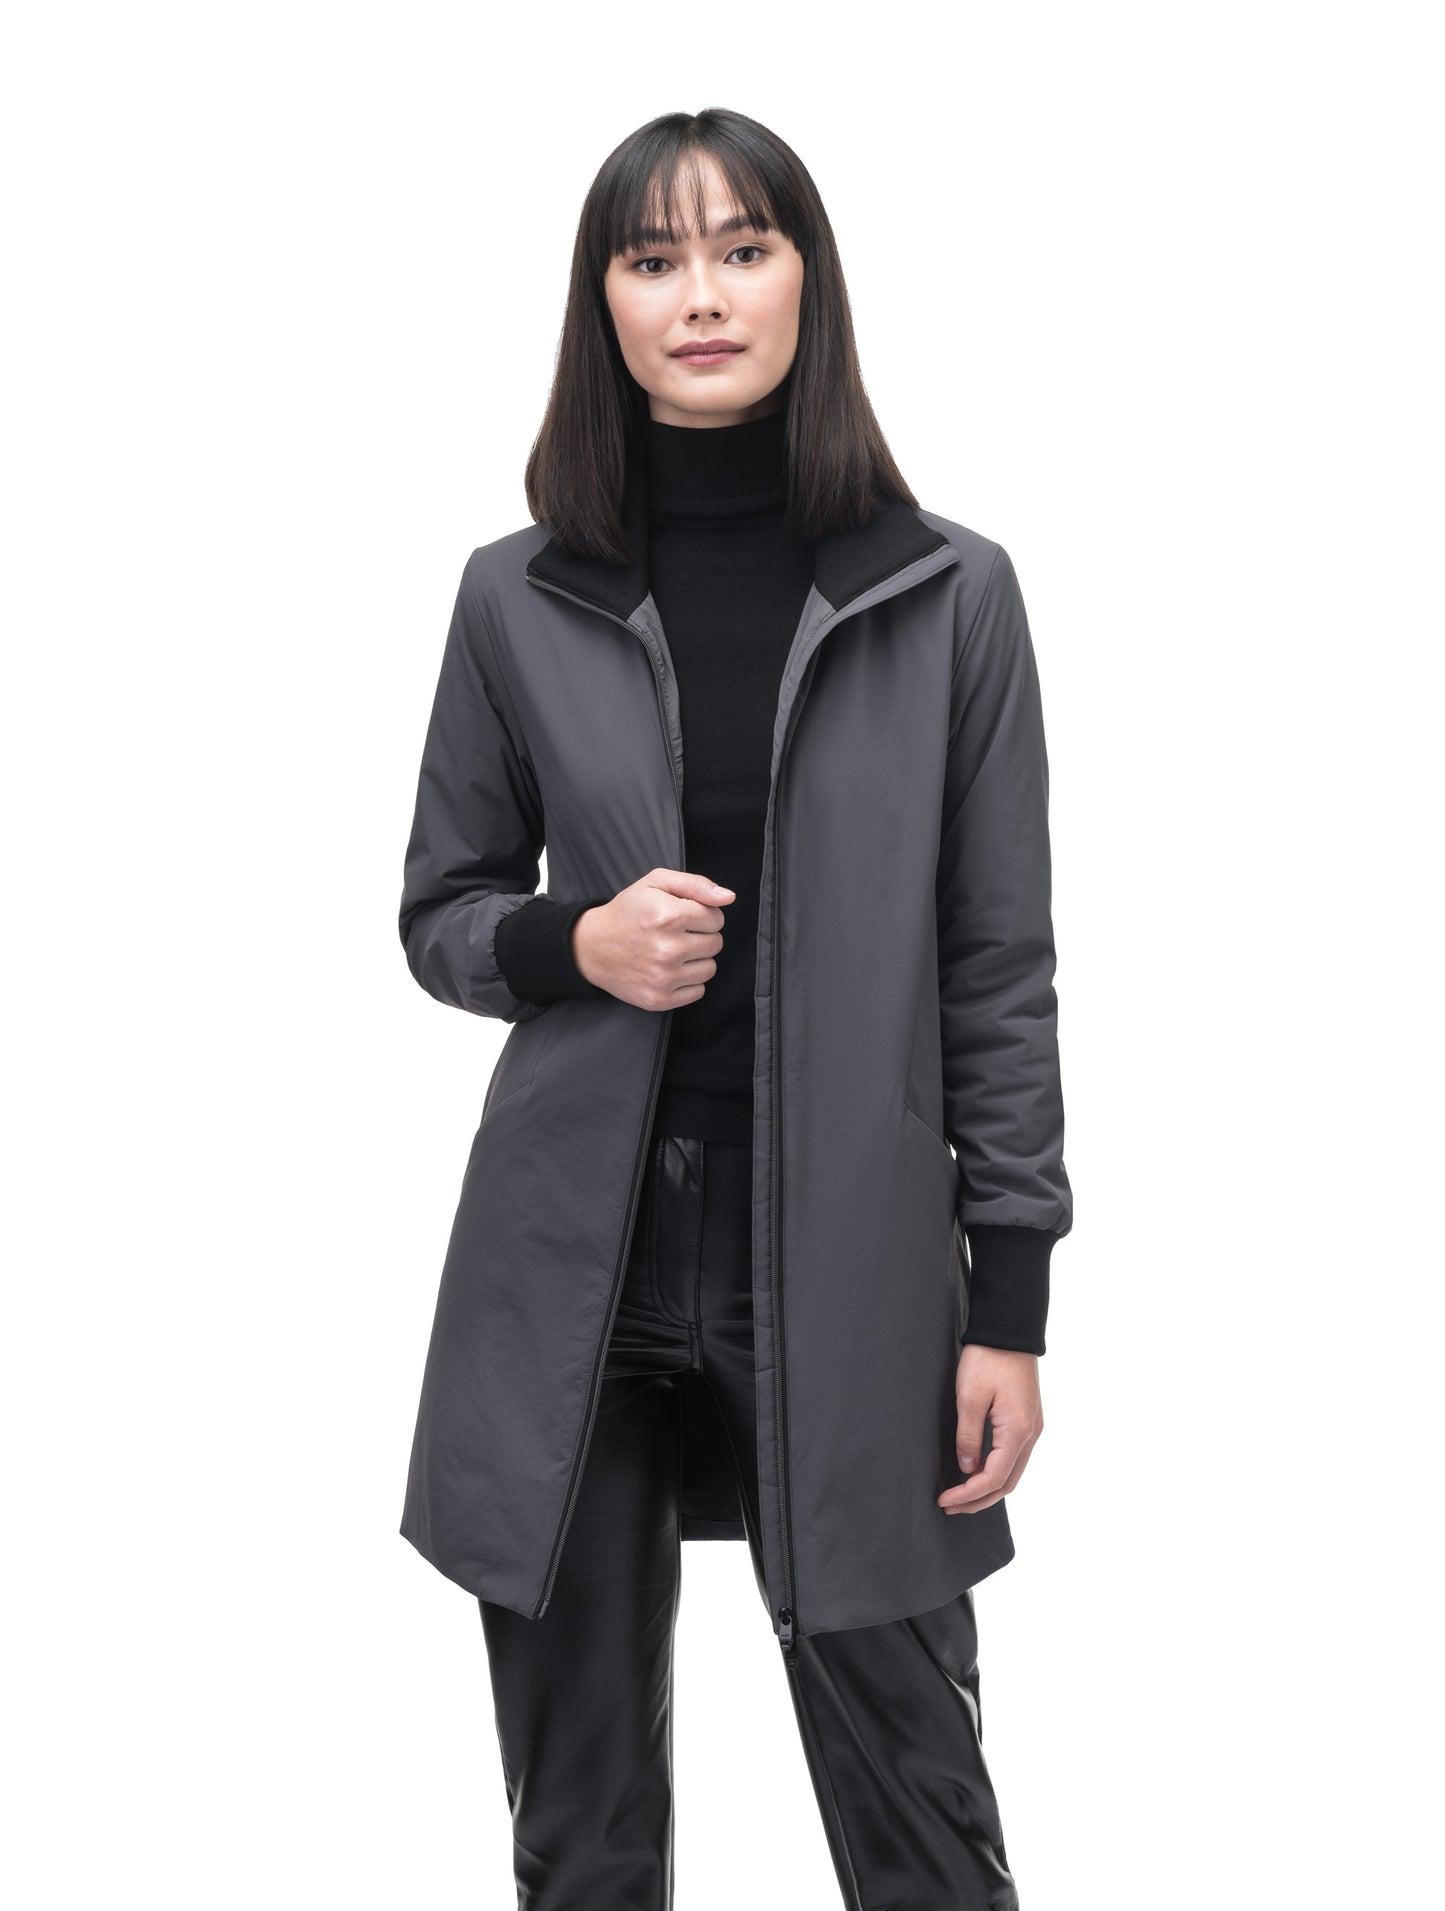 Mora Ladies Mid Layer Rib Neck Jacket in thigh length, Primaloft insulation, ribbing at collar and cuffs, and two-way front zipper, in Steel Grey